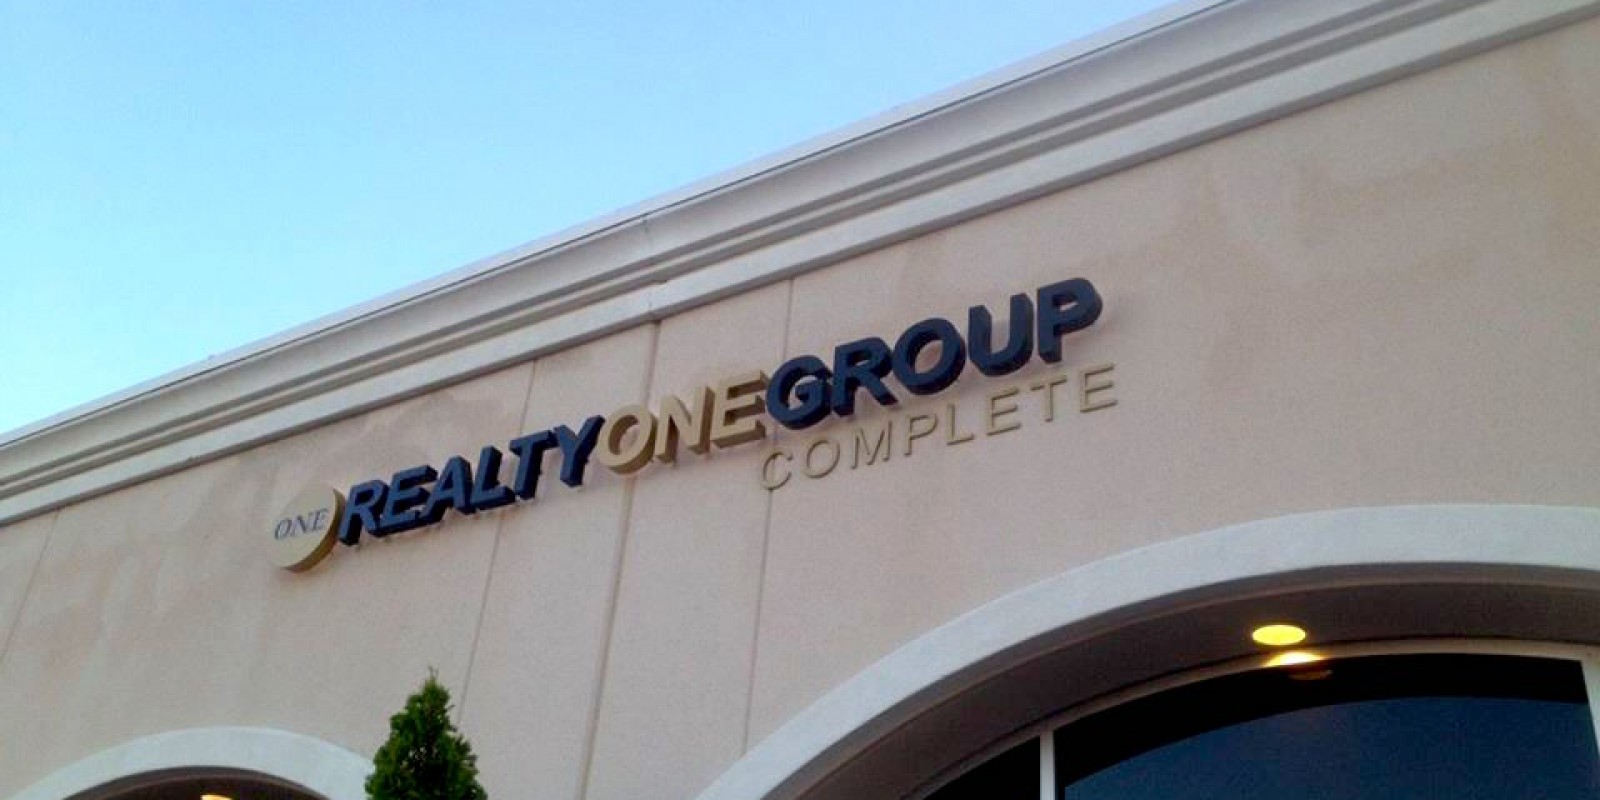 Realtyonegroup Complete Wins Best Of The Best Real Estate Company